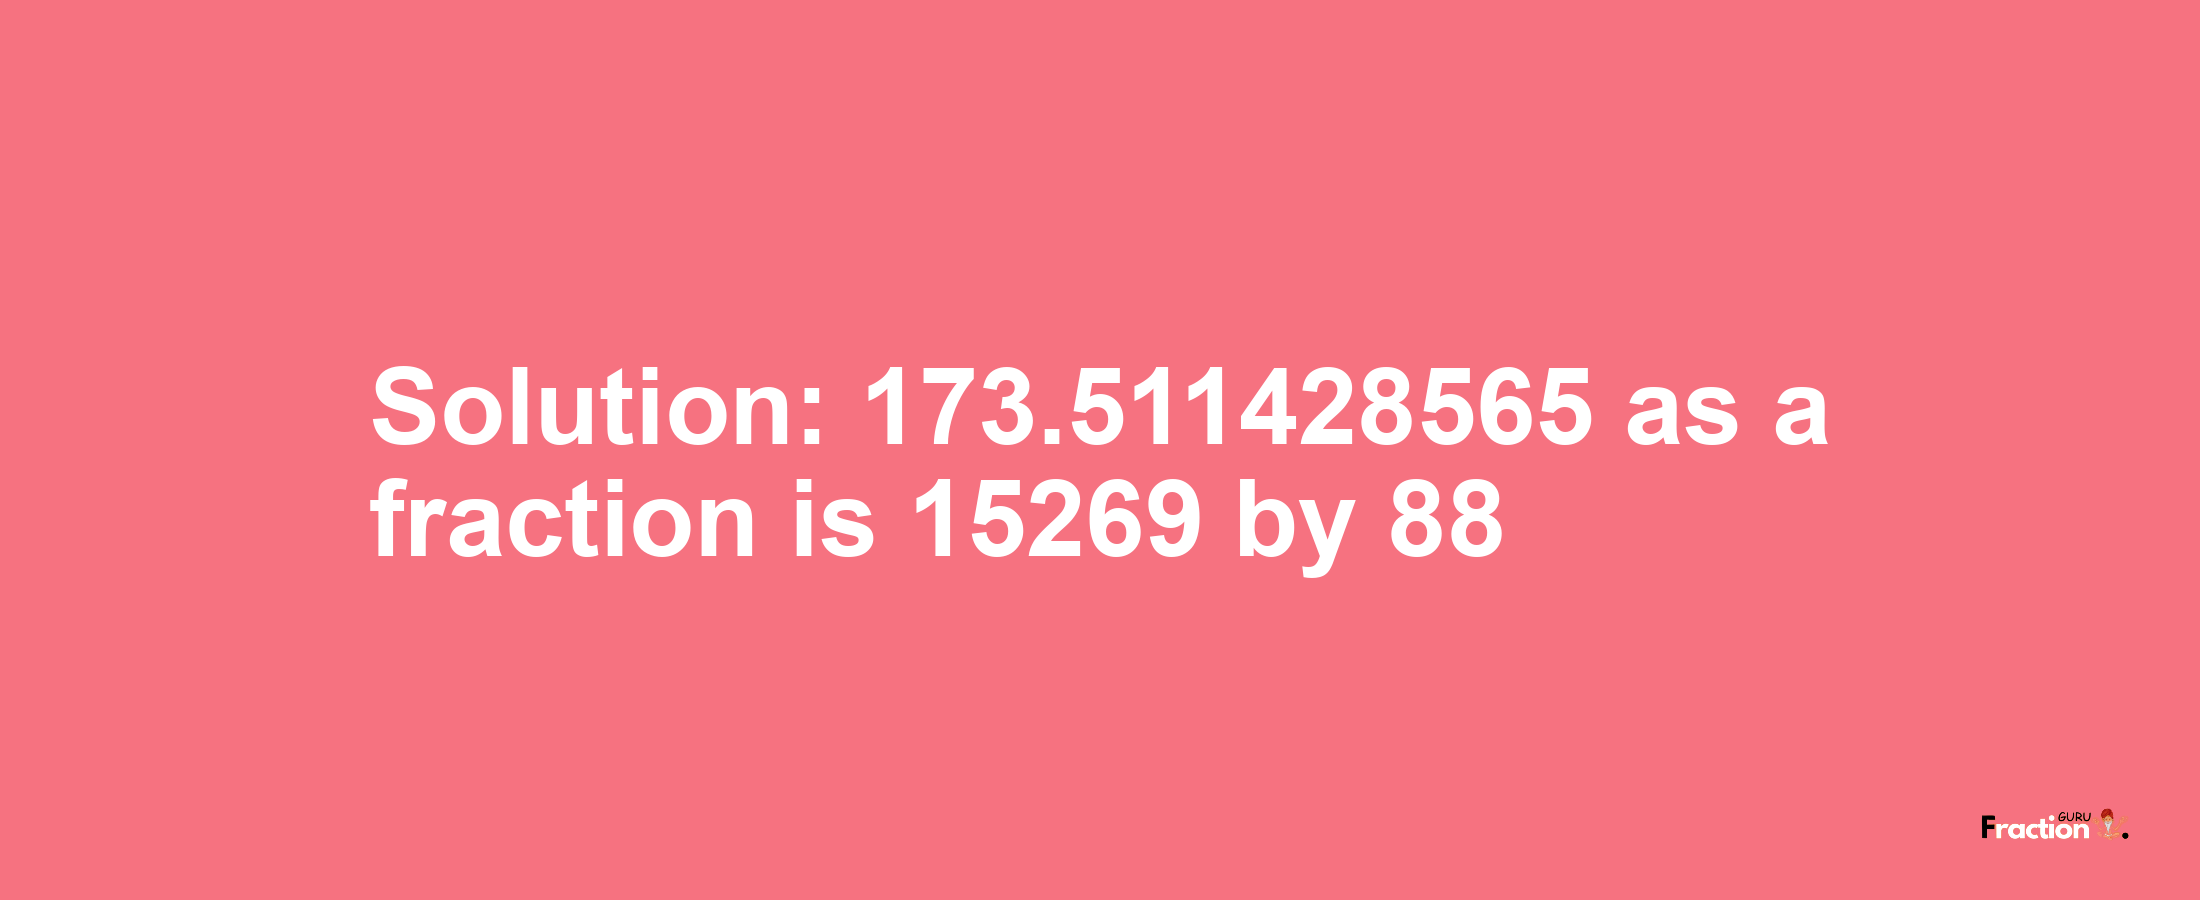 Solution:173.511428565 as a fraction is 15269/88